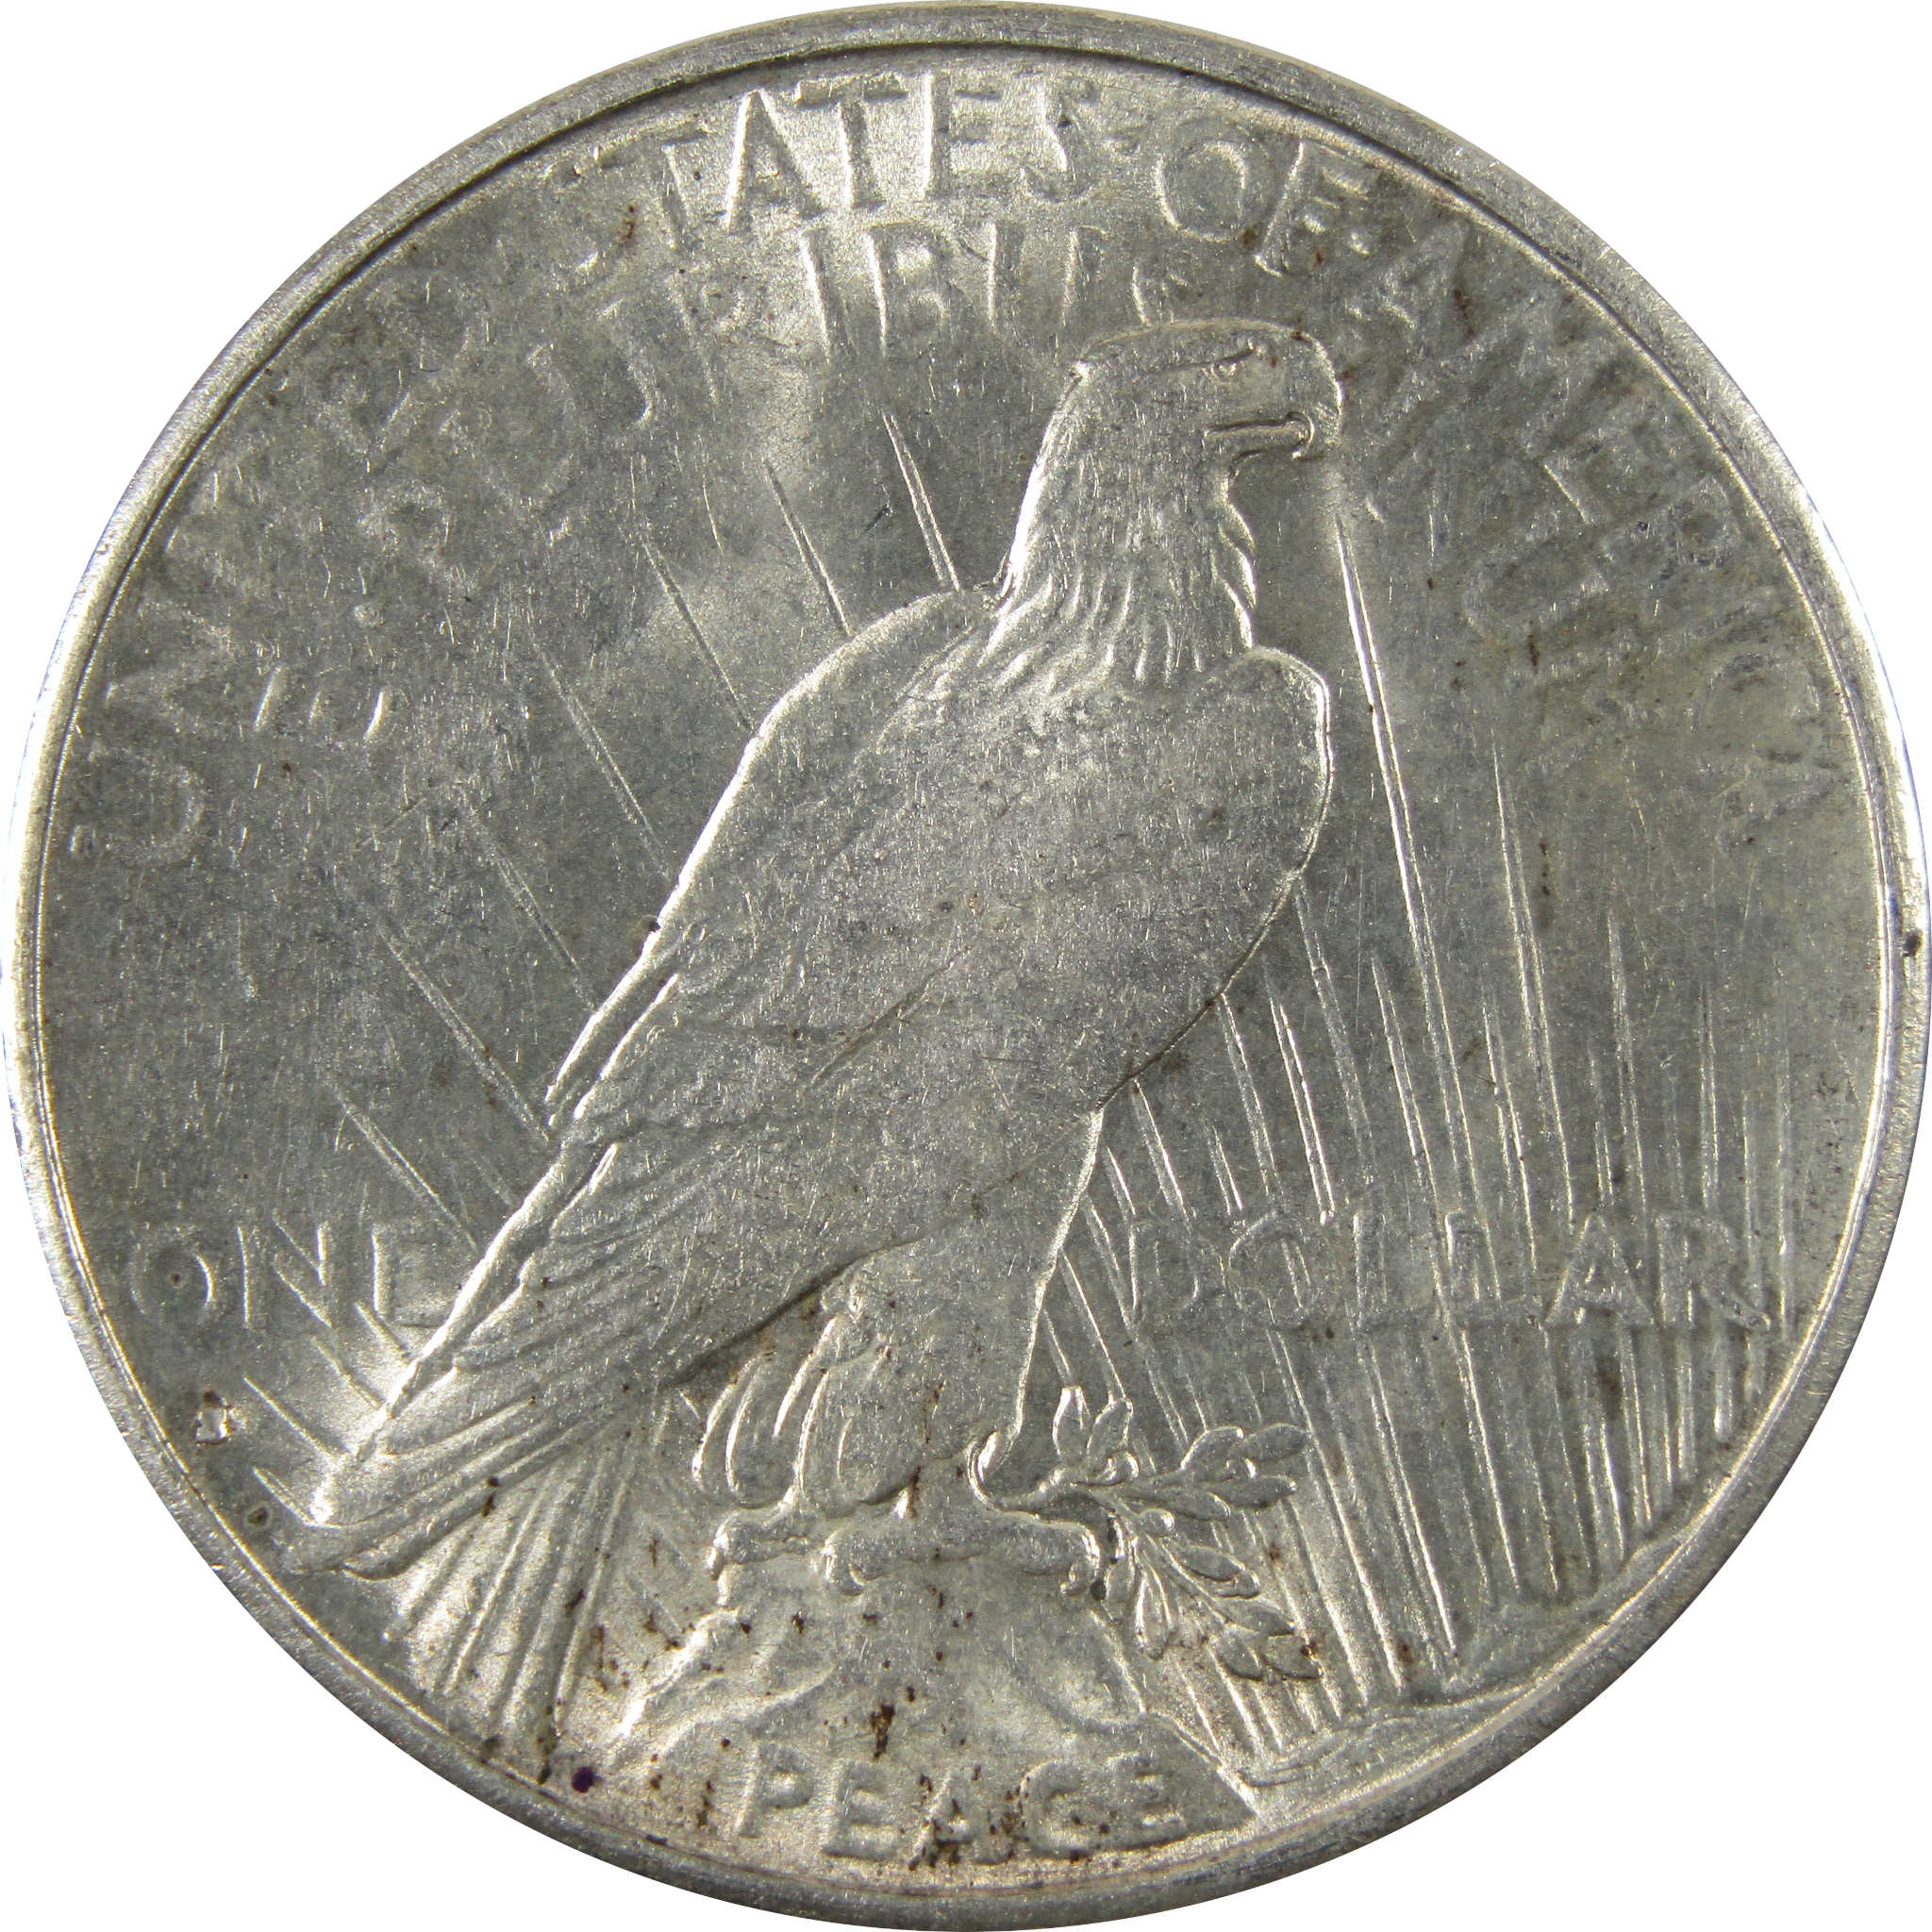 1935 S Peace Dollar AU About Uncirculated 90% Silver $1 Coin SKU:I7438